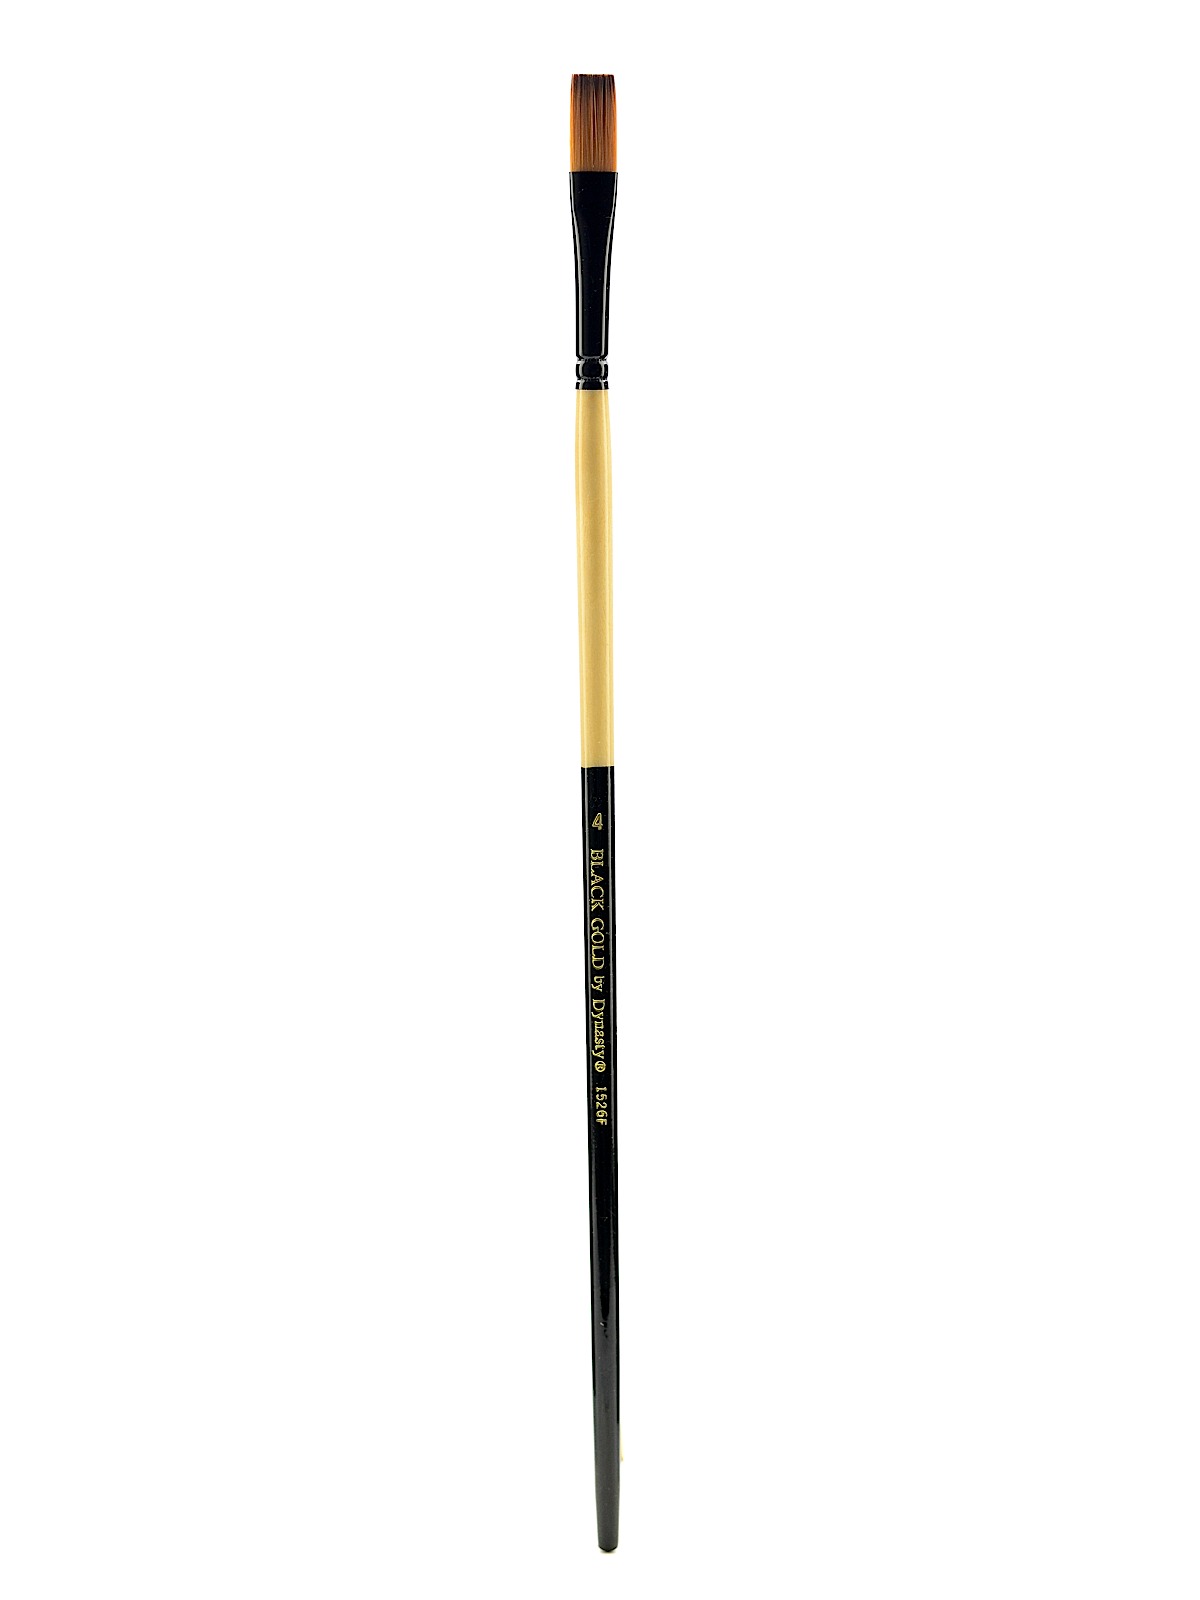 Black Gold Series Long Handled Synthetic Brushes 4 Flat 1526F